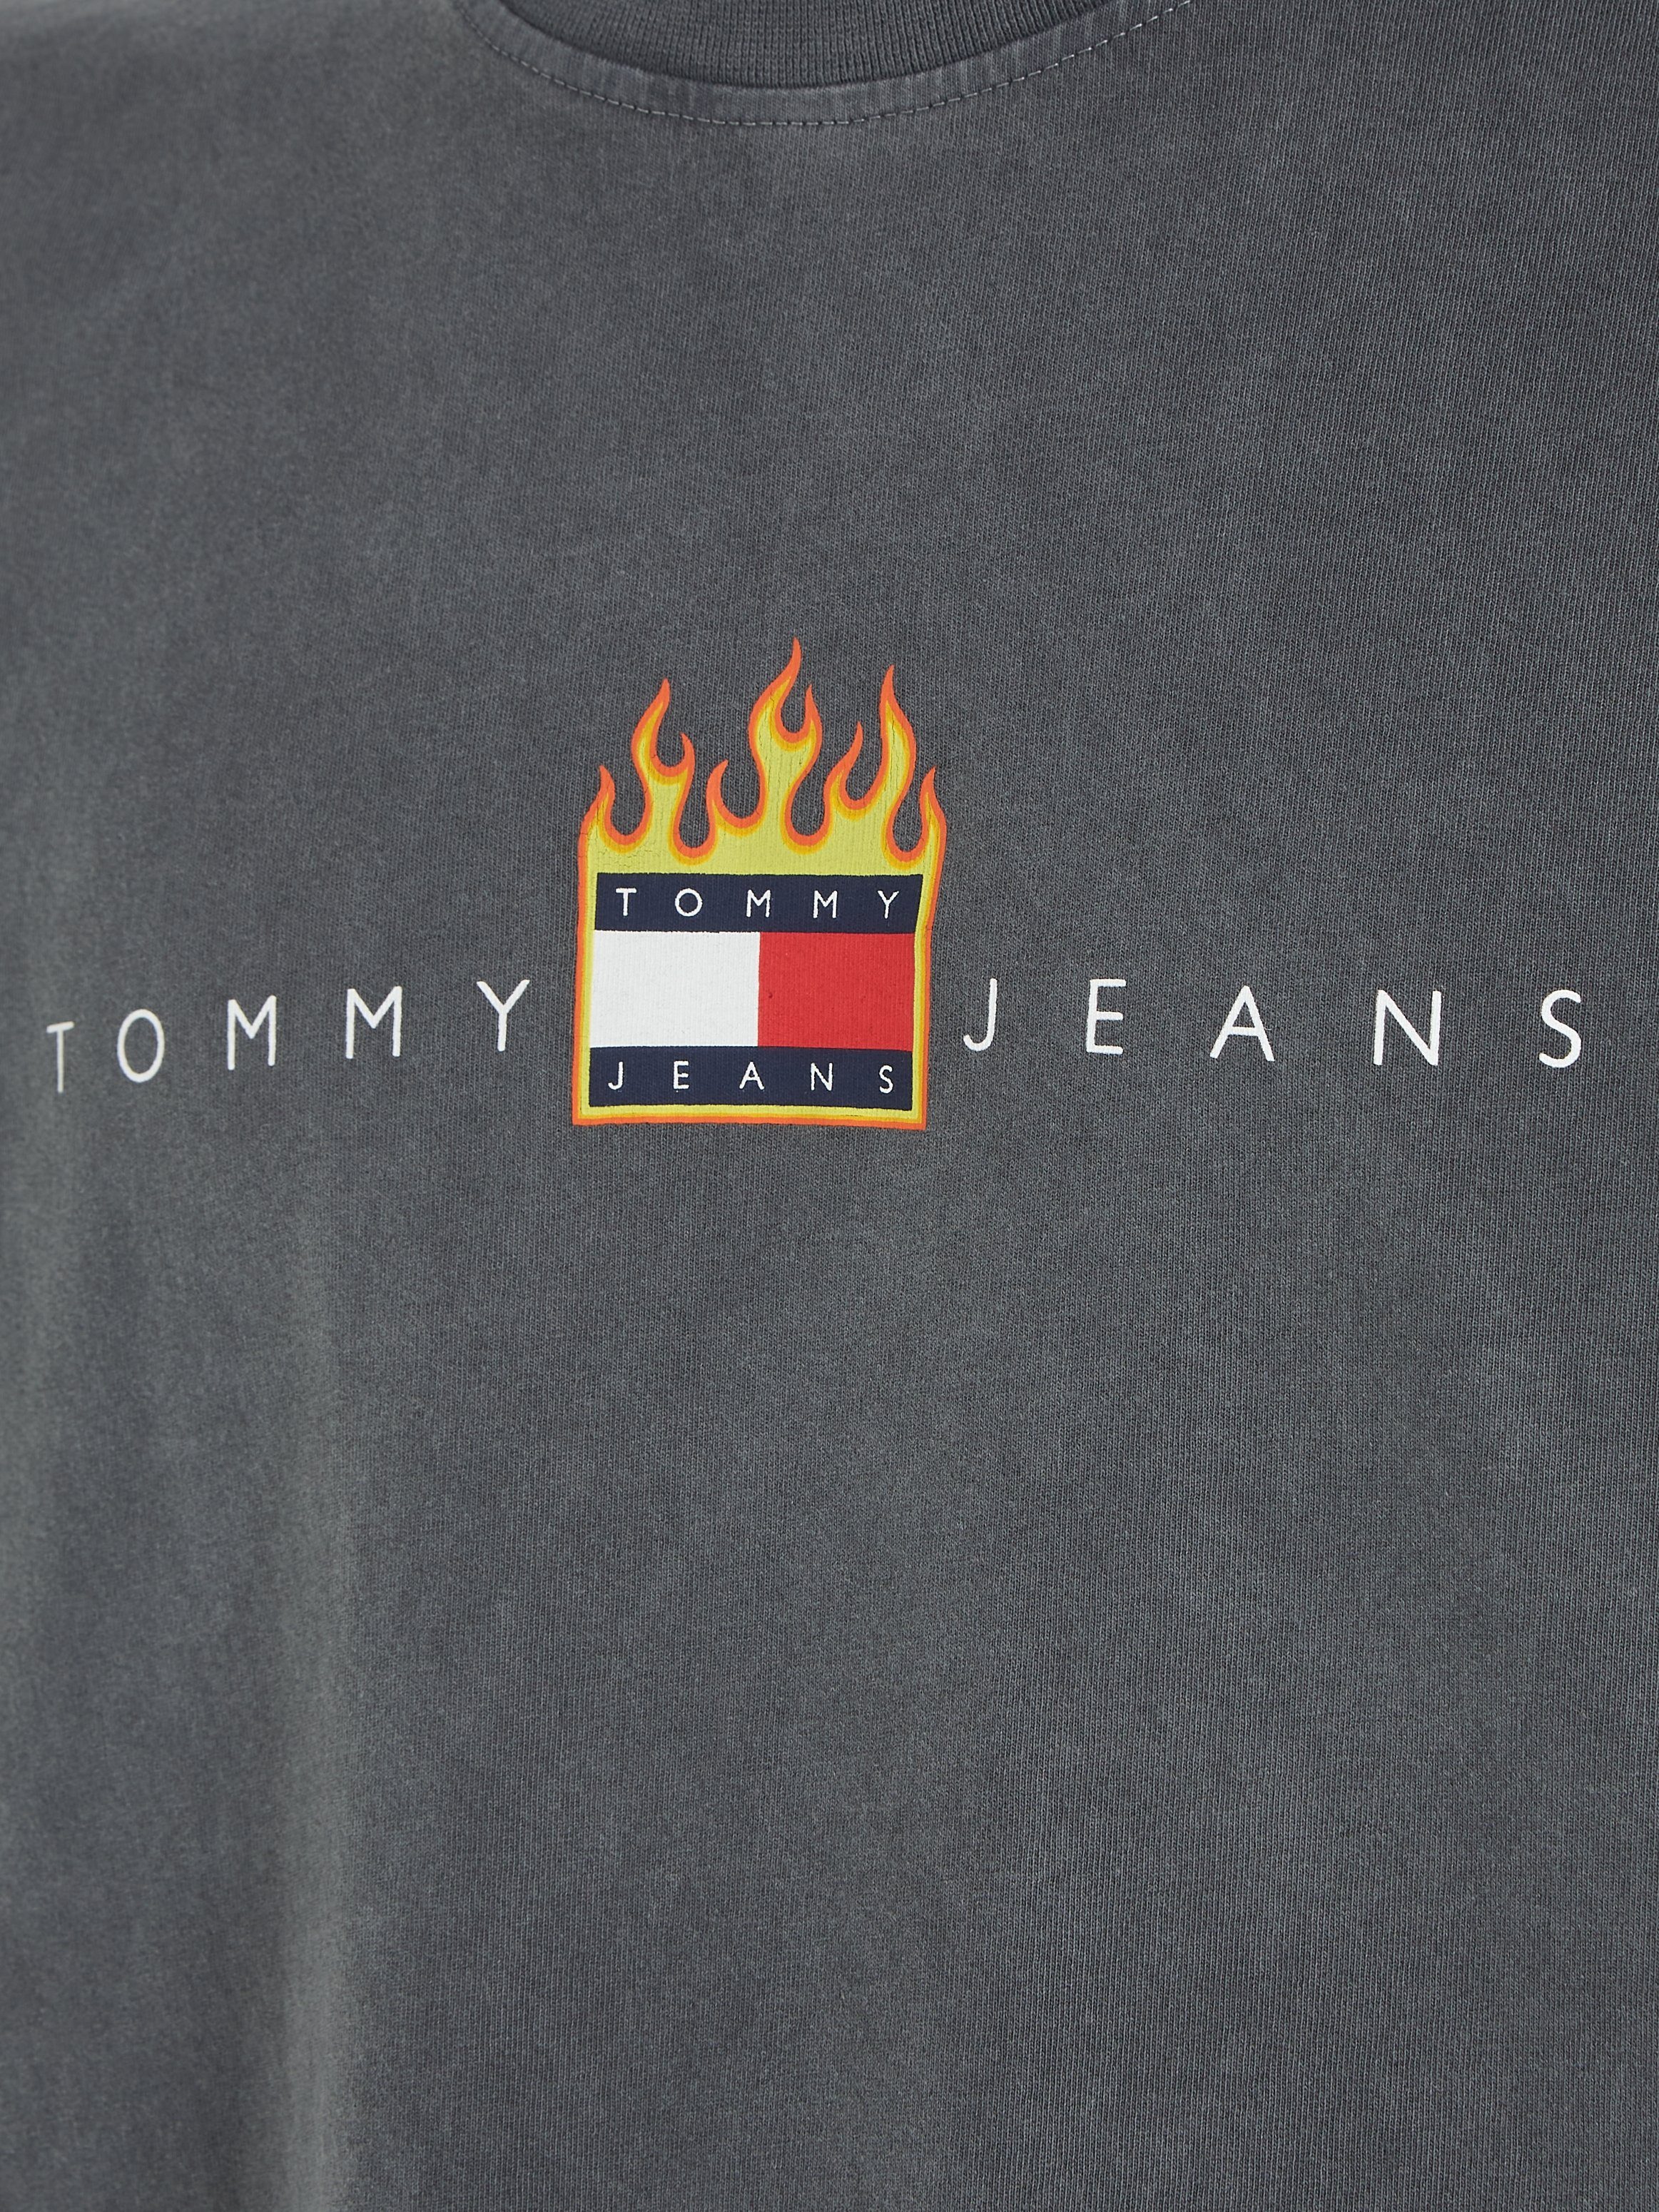 FIRE T-Shirt TJM FLAG Charcoal Jeans RLX LINEAR TEE New Tommy